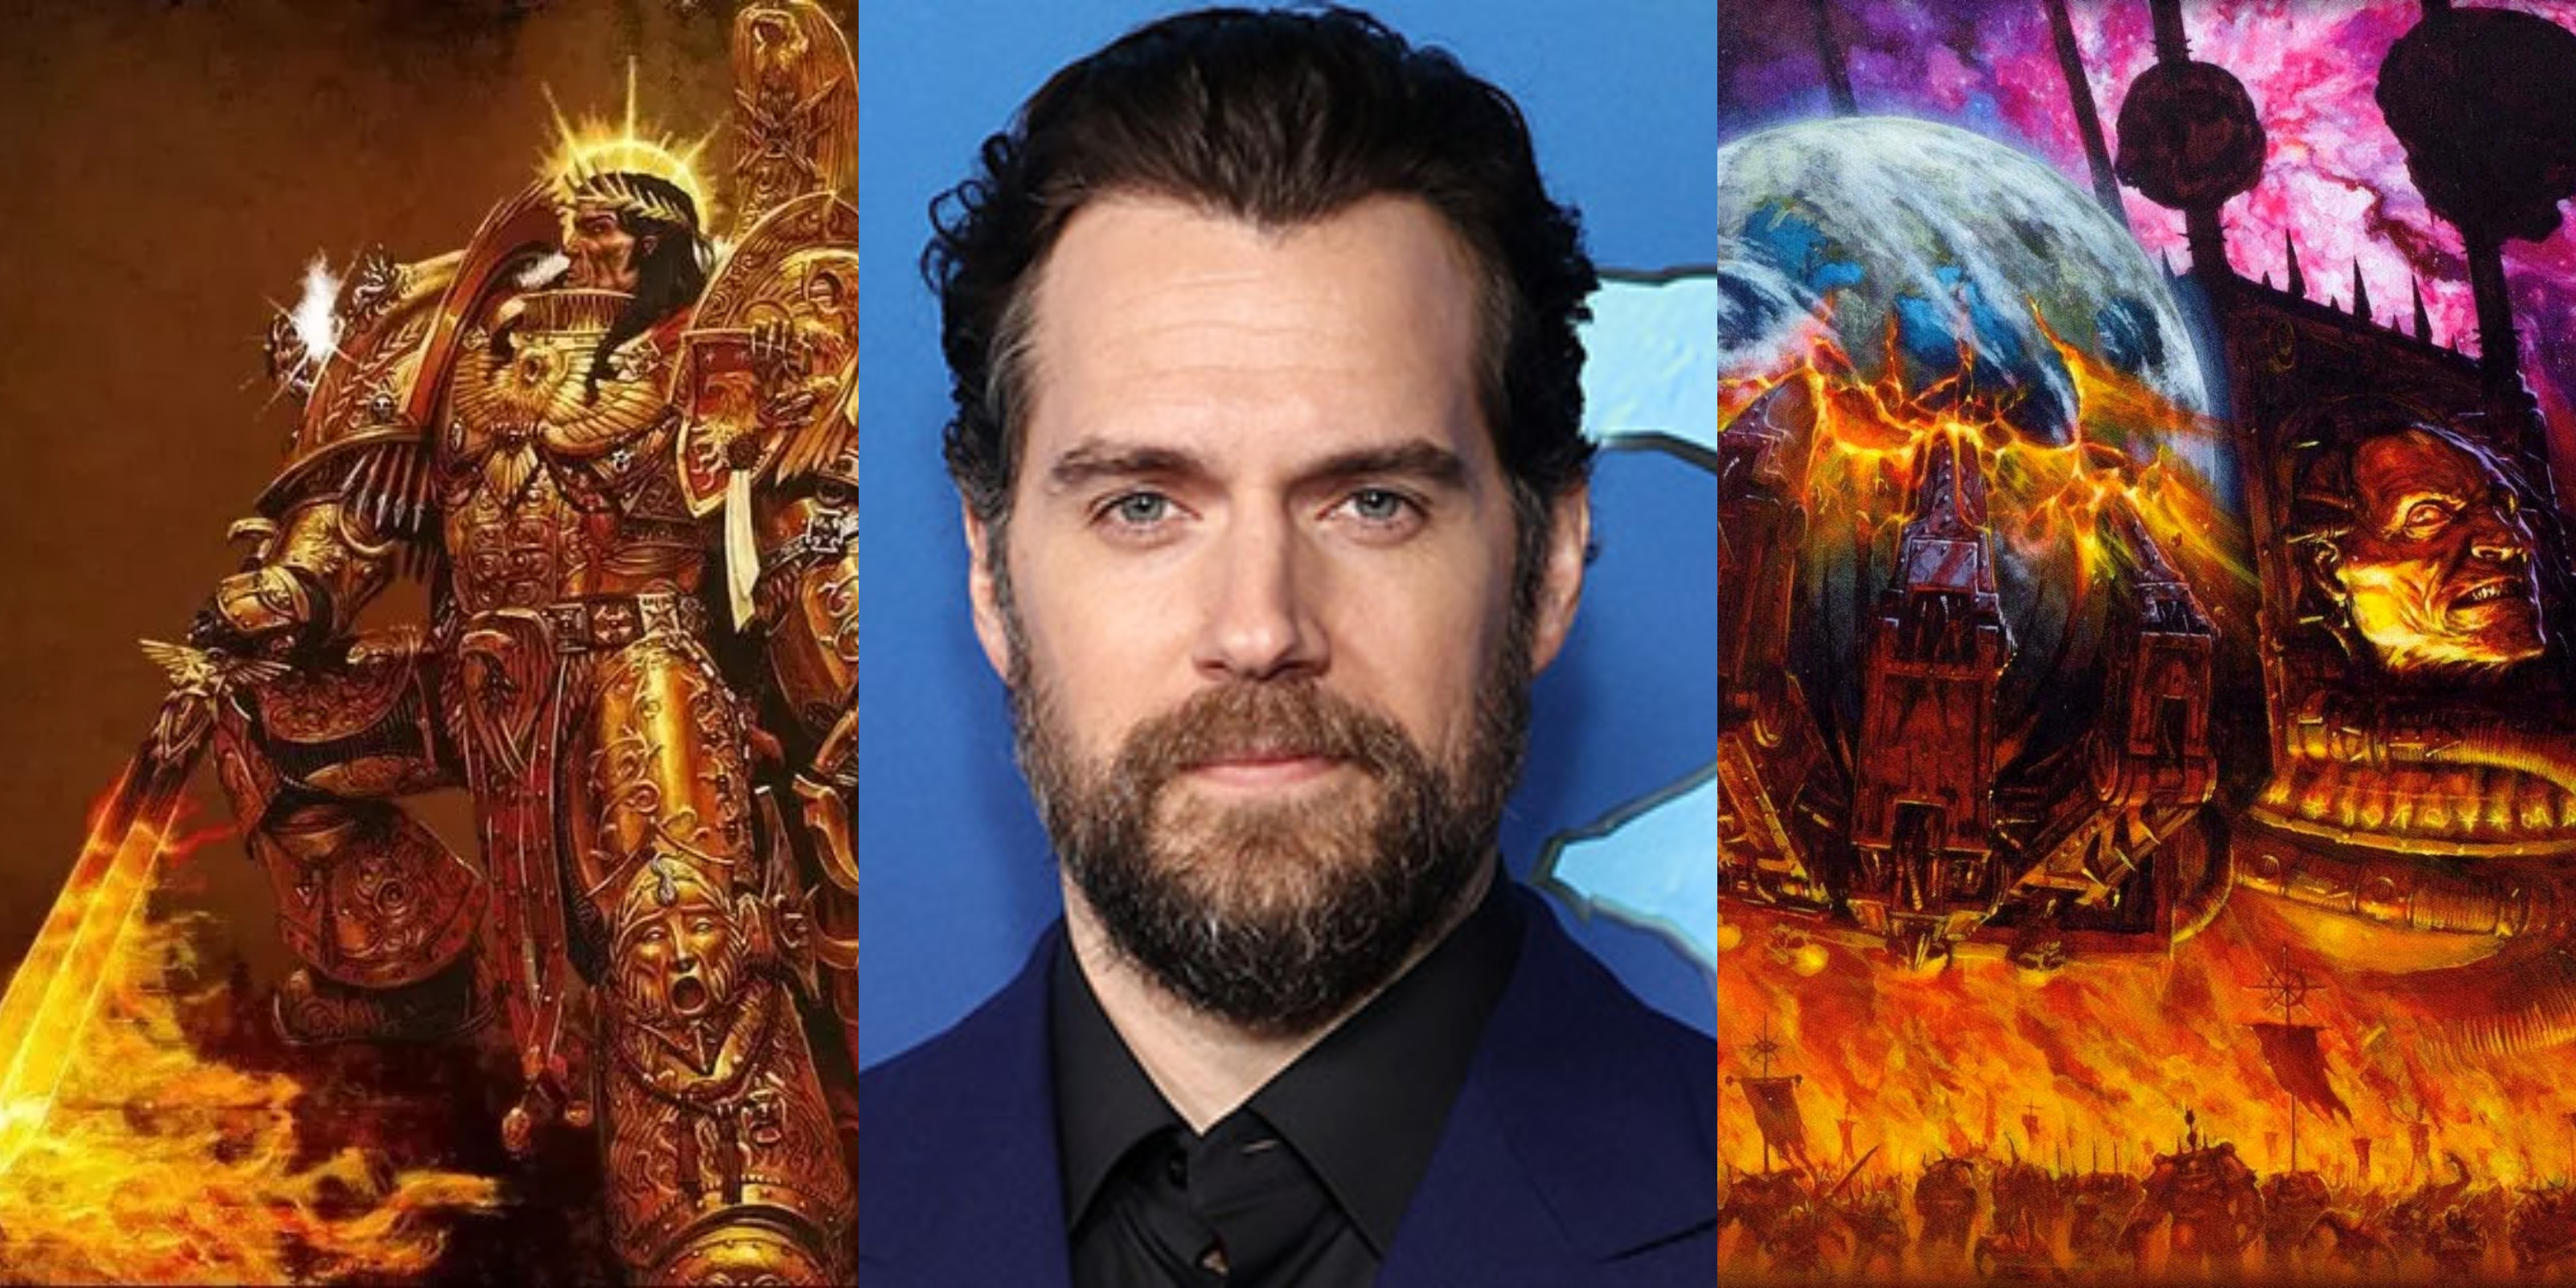 Let's All Rate Henry Cavill's Warhammer 40K Paint Job